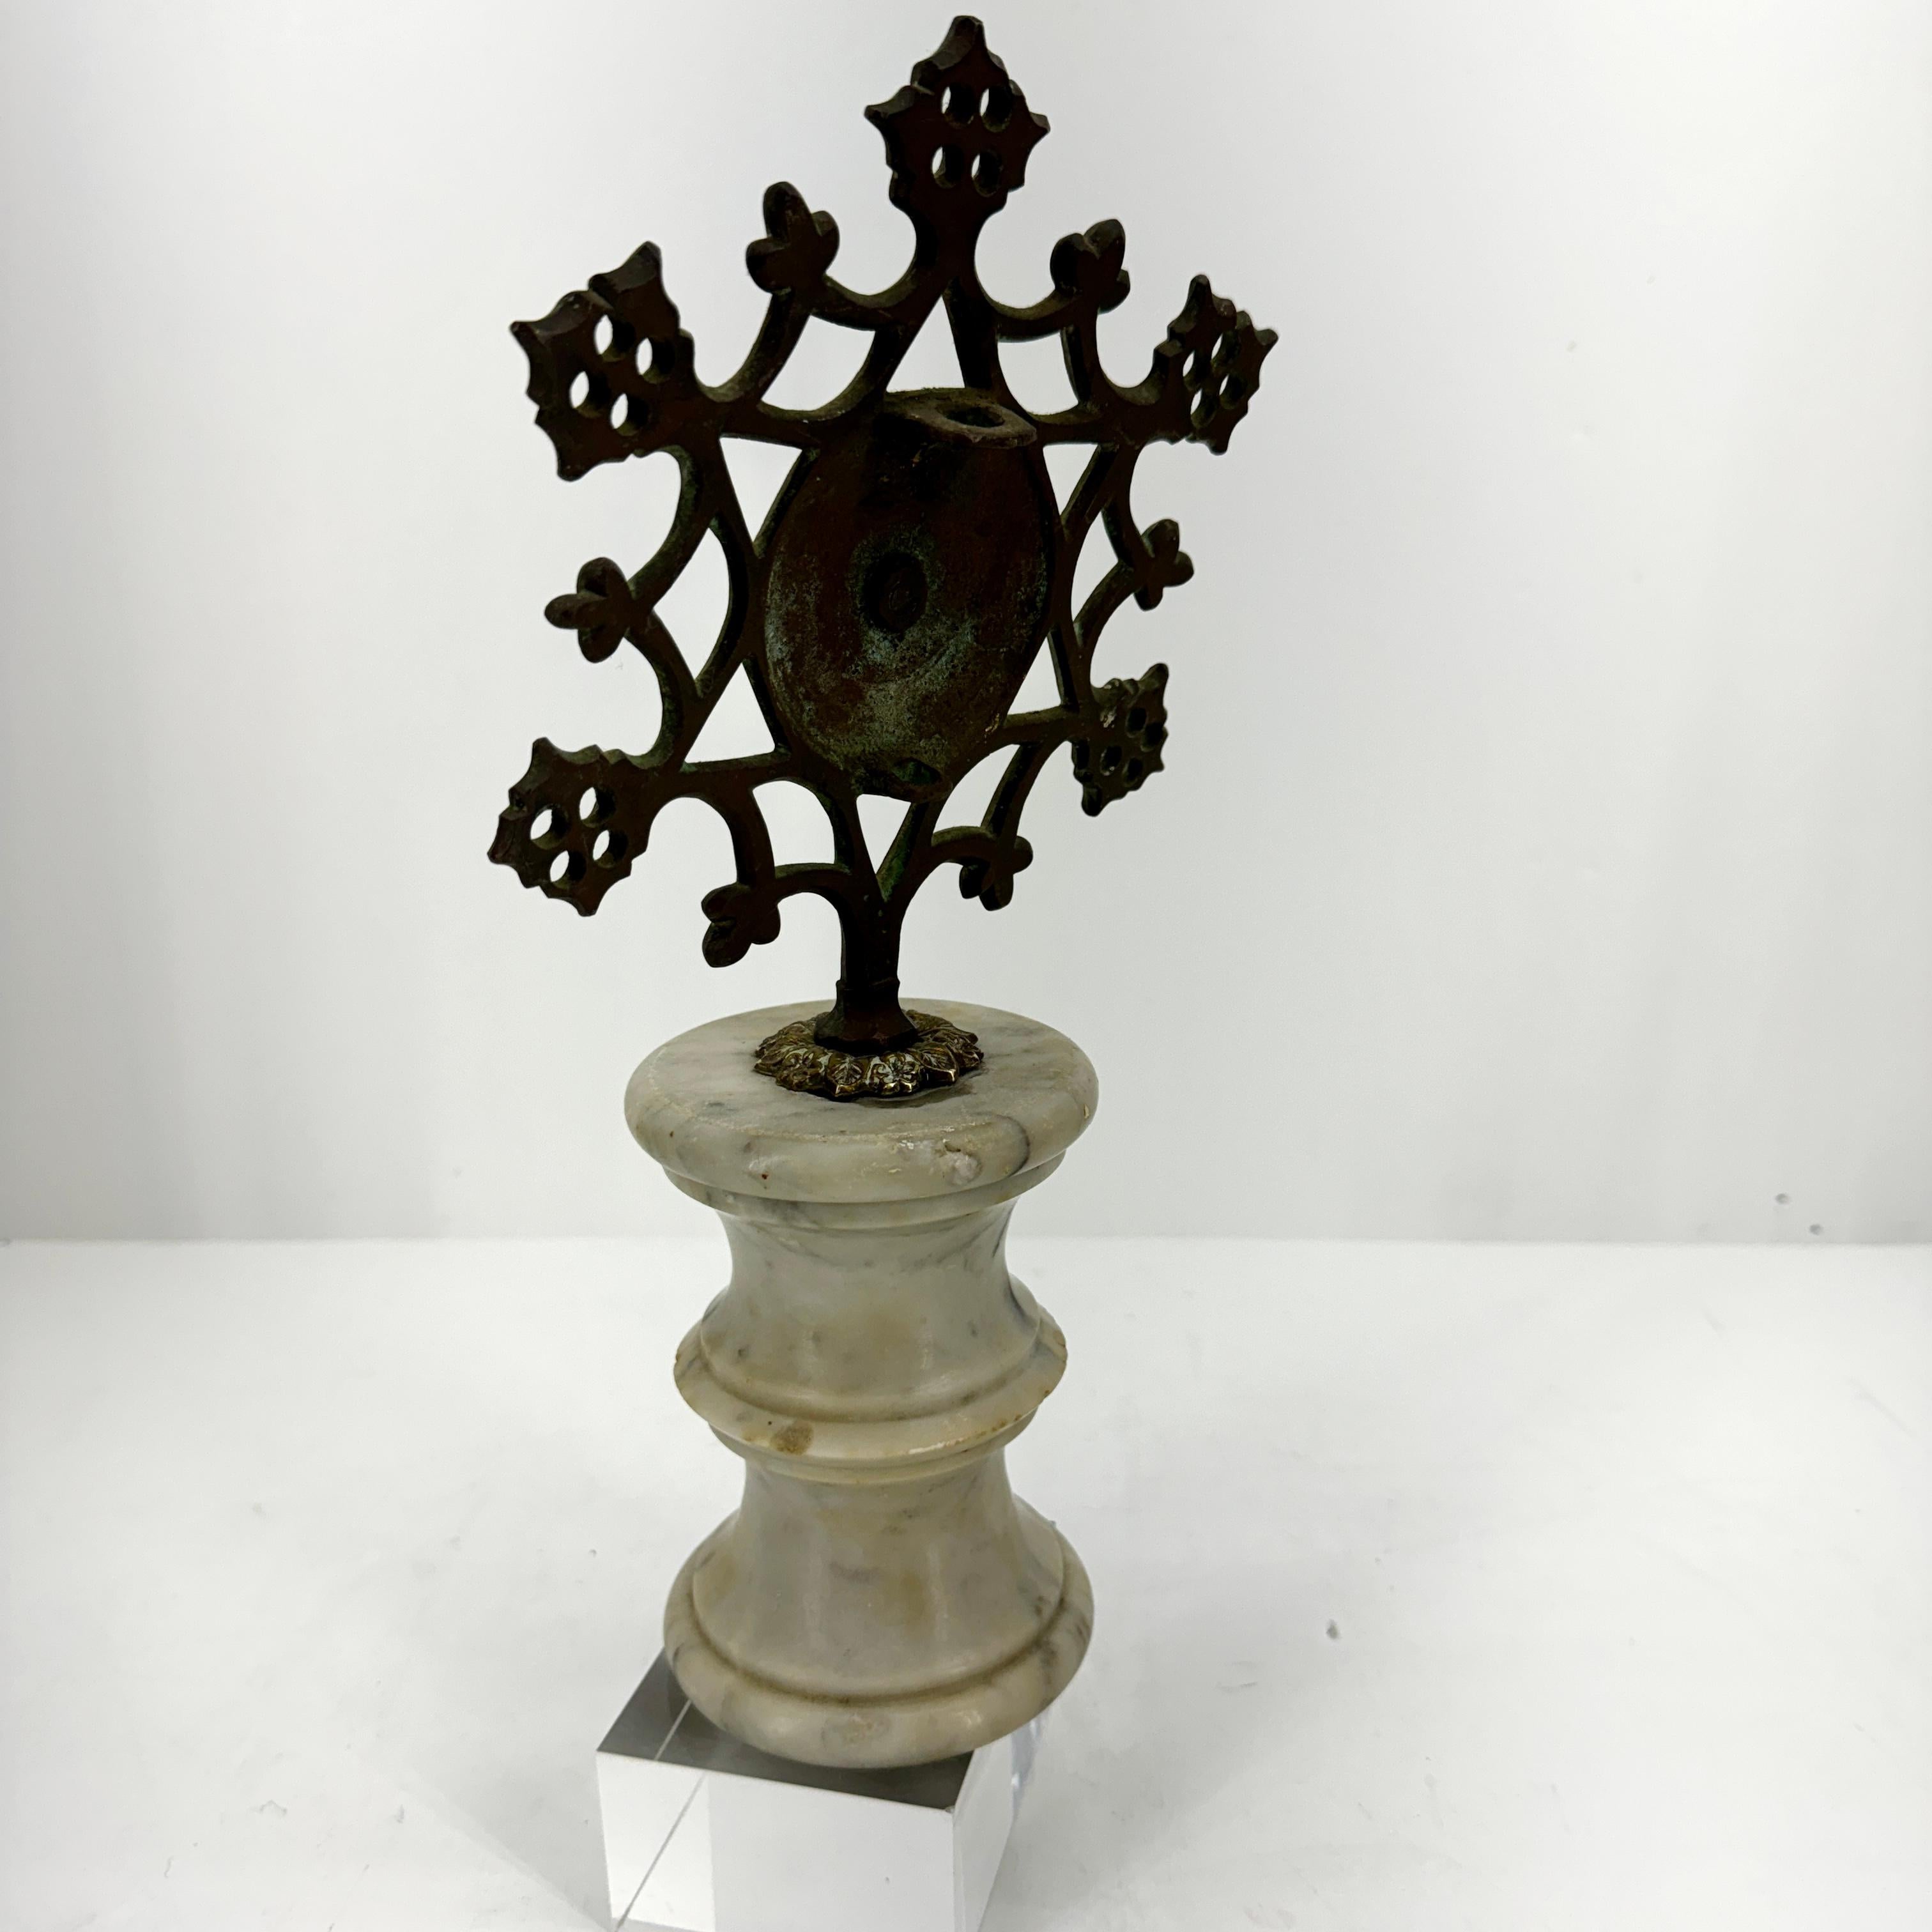 European Religious Bronze Sculpture Fragment on 19th Century Marble Pedestal In Good Condition For Sale In Haddonfield, NJ